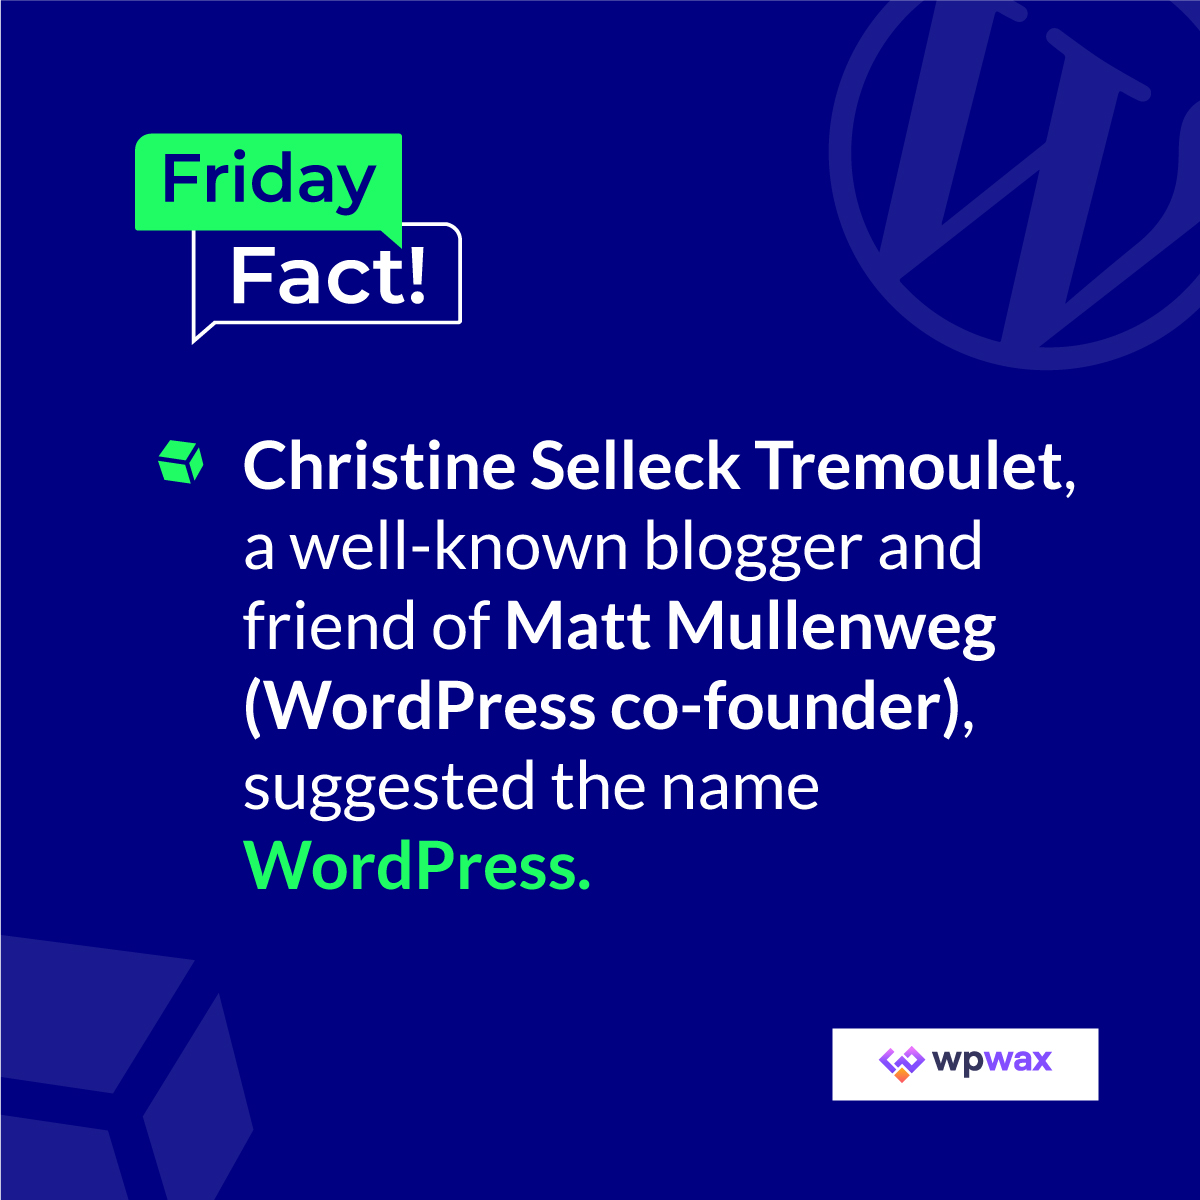 The story of how a simple suggestion became a global phenomenon!
#wordpress #wordpressfacts #wordpresshistory #fridayfact #factoftheday #didyouknow